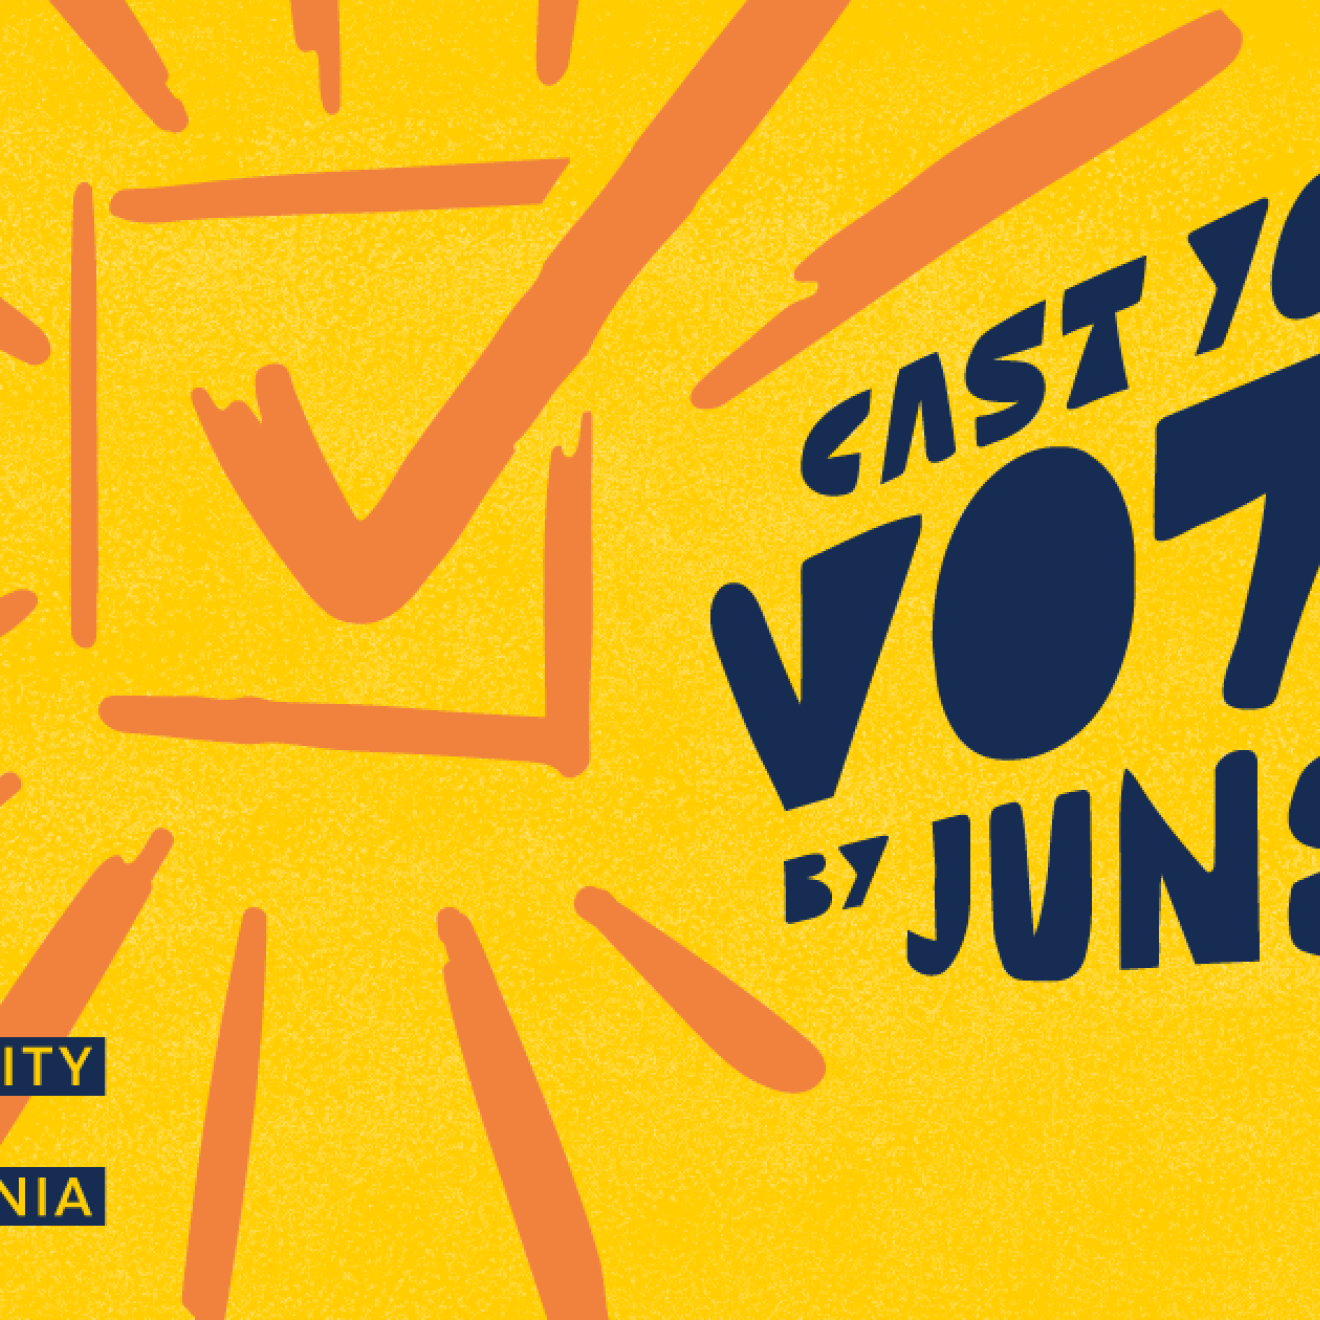 illustration says Cast your vote by June 7